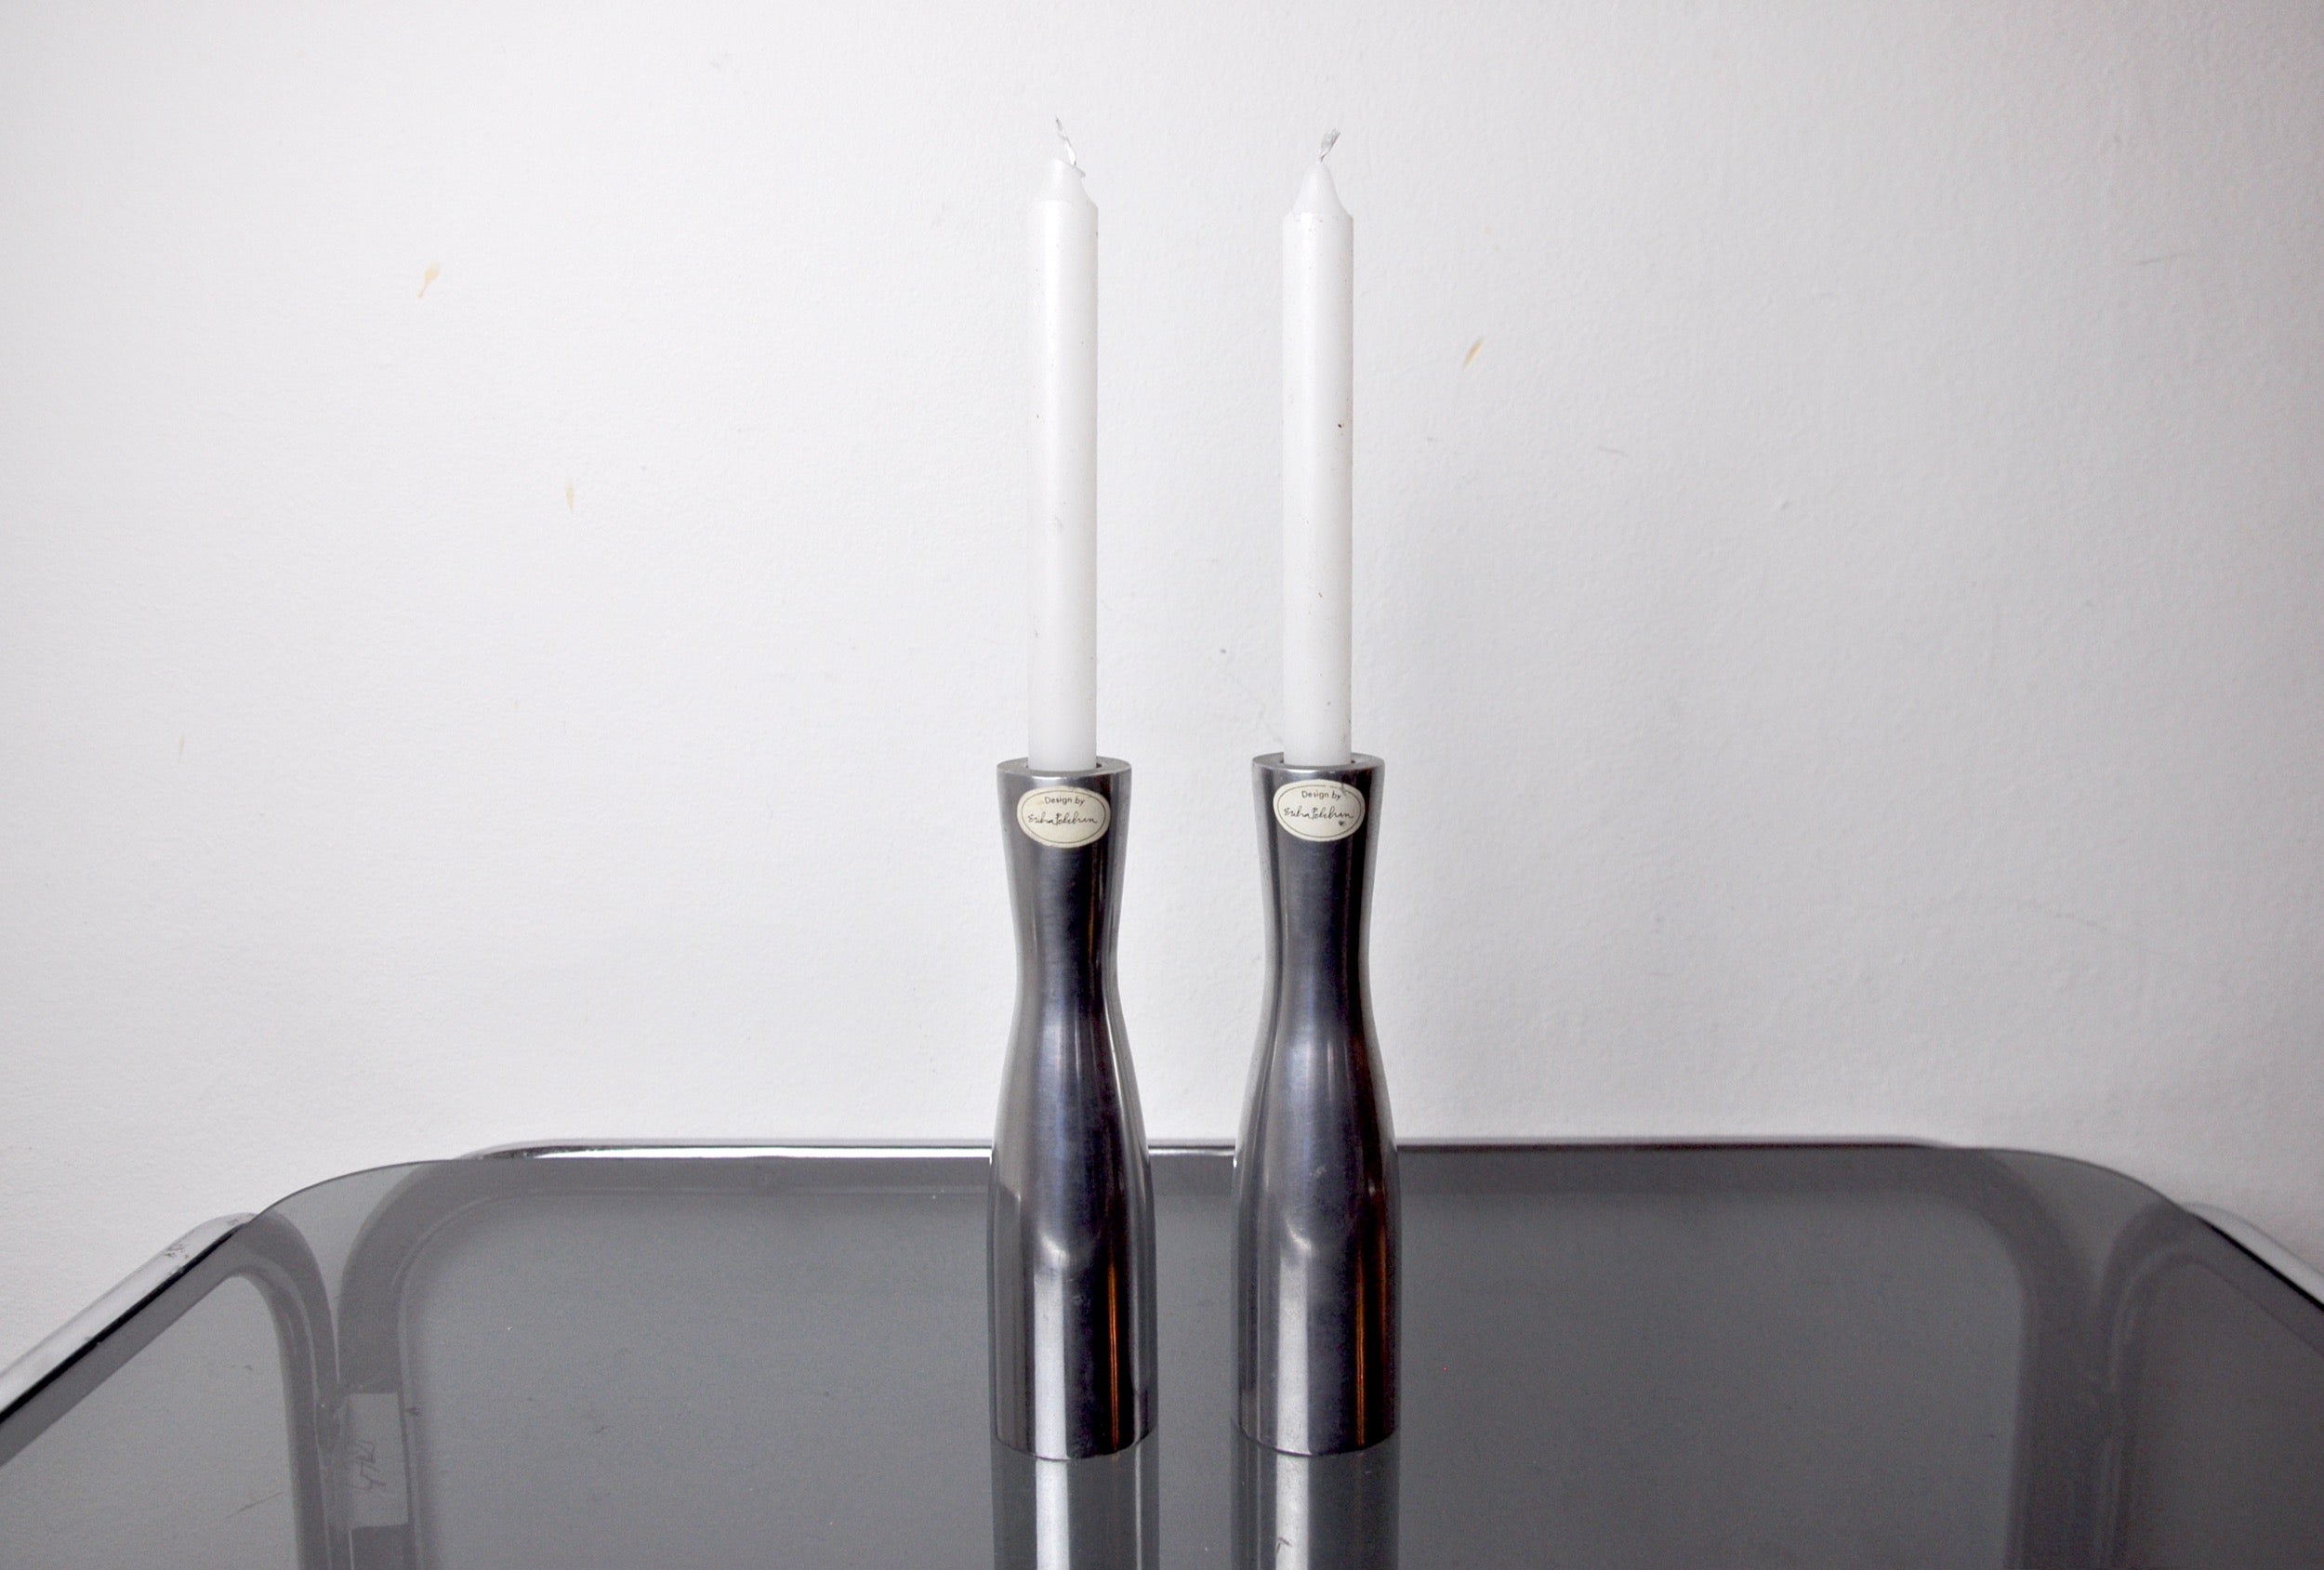 Very nice pair of abstract modernism candle holders, made of solid and heavy polished steel.

An elegant scandinavian design, conceived in the early 90s by the famous designer erika pekkari.

Design objects that will perfectly decorate your